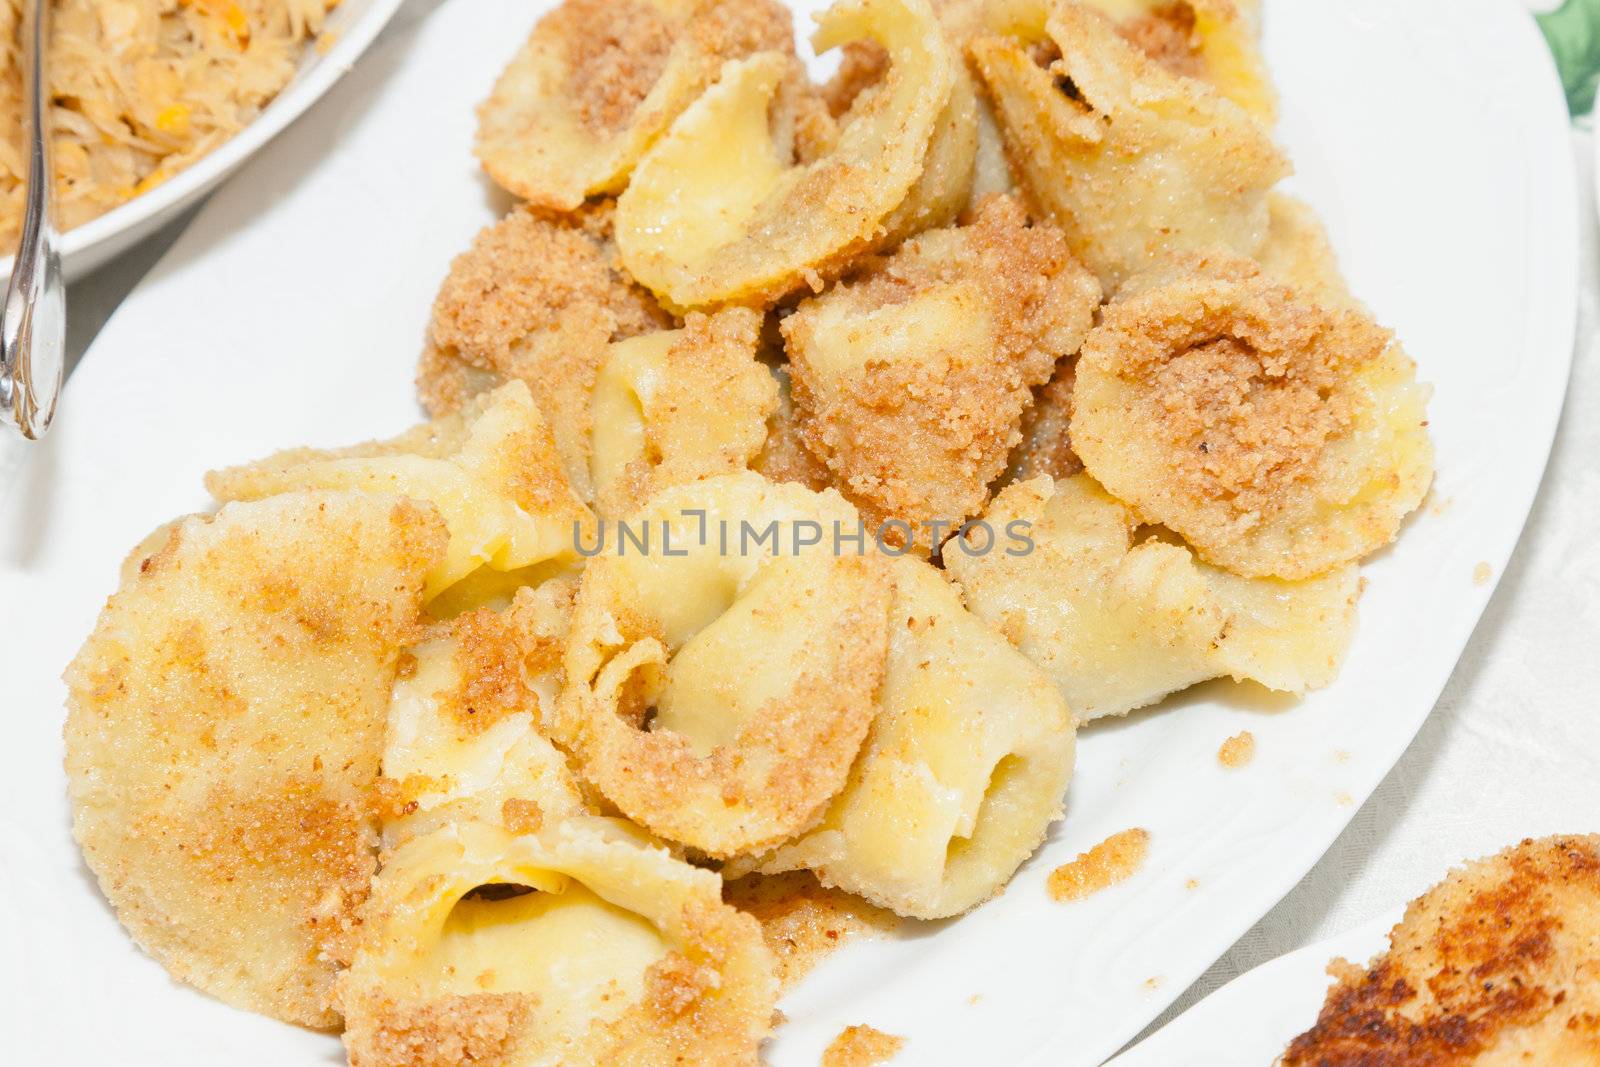 Uszka are small dumplings (a very small and twisted version of pierogi) usually filled with flavoursome wild forest mushrooms and/or minced meat.